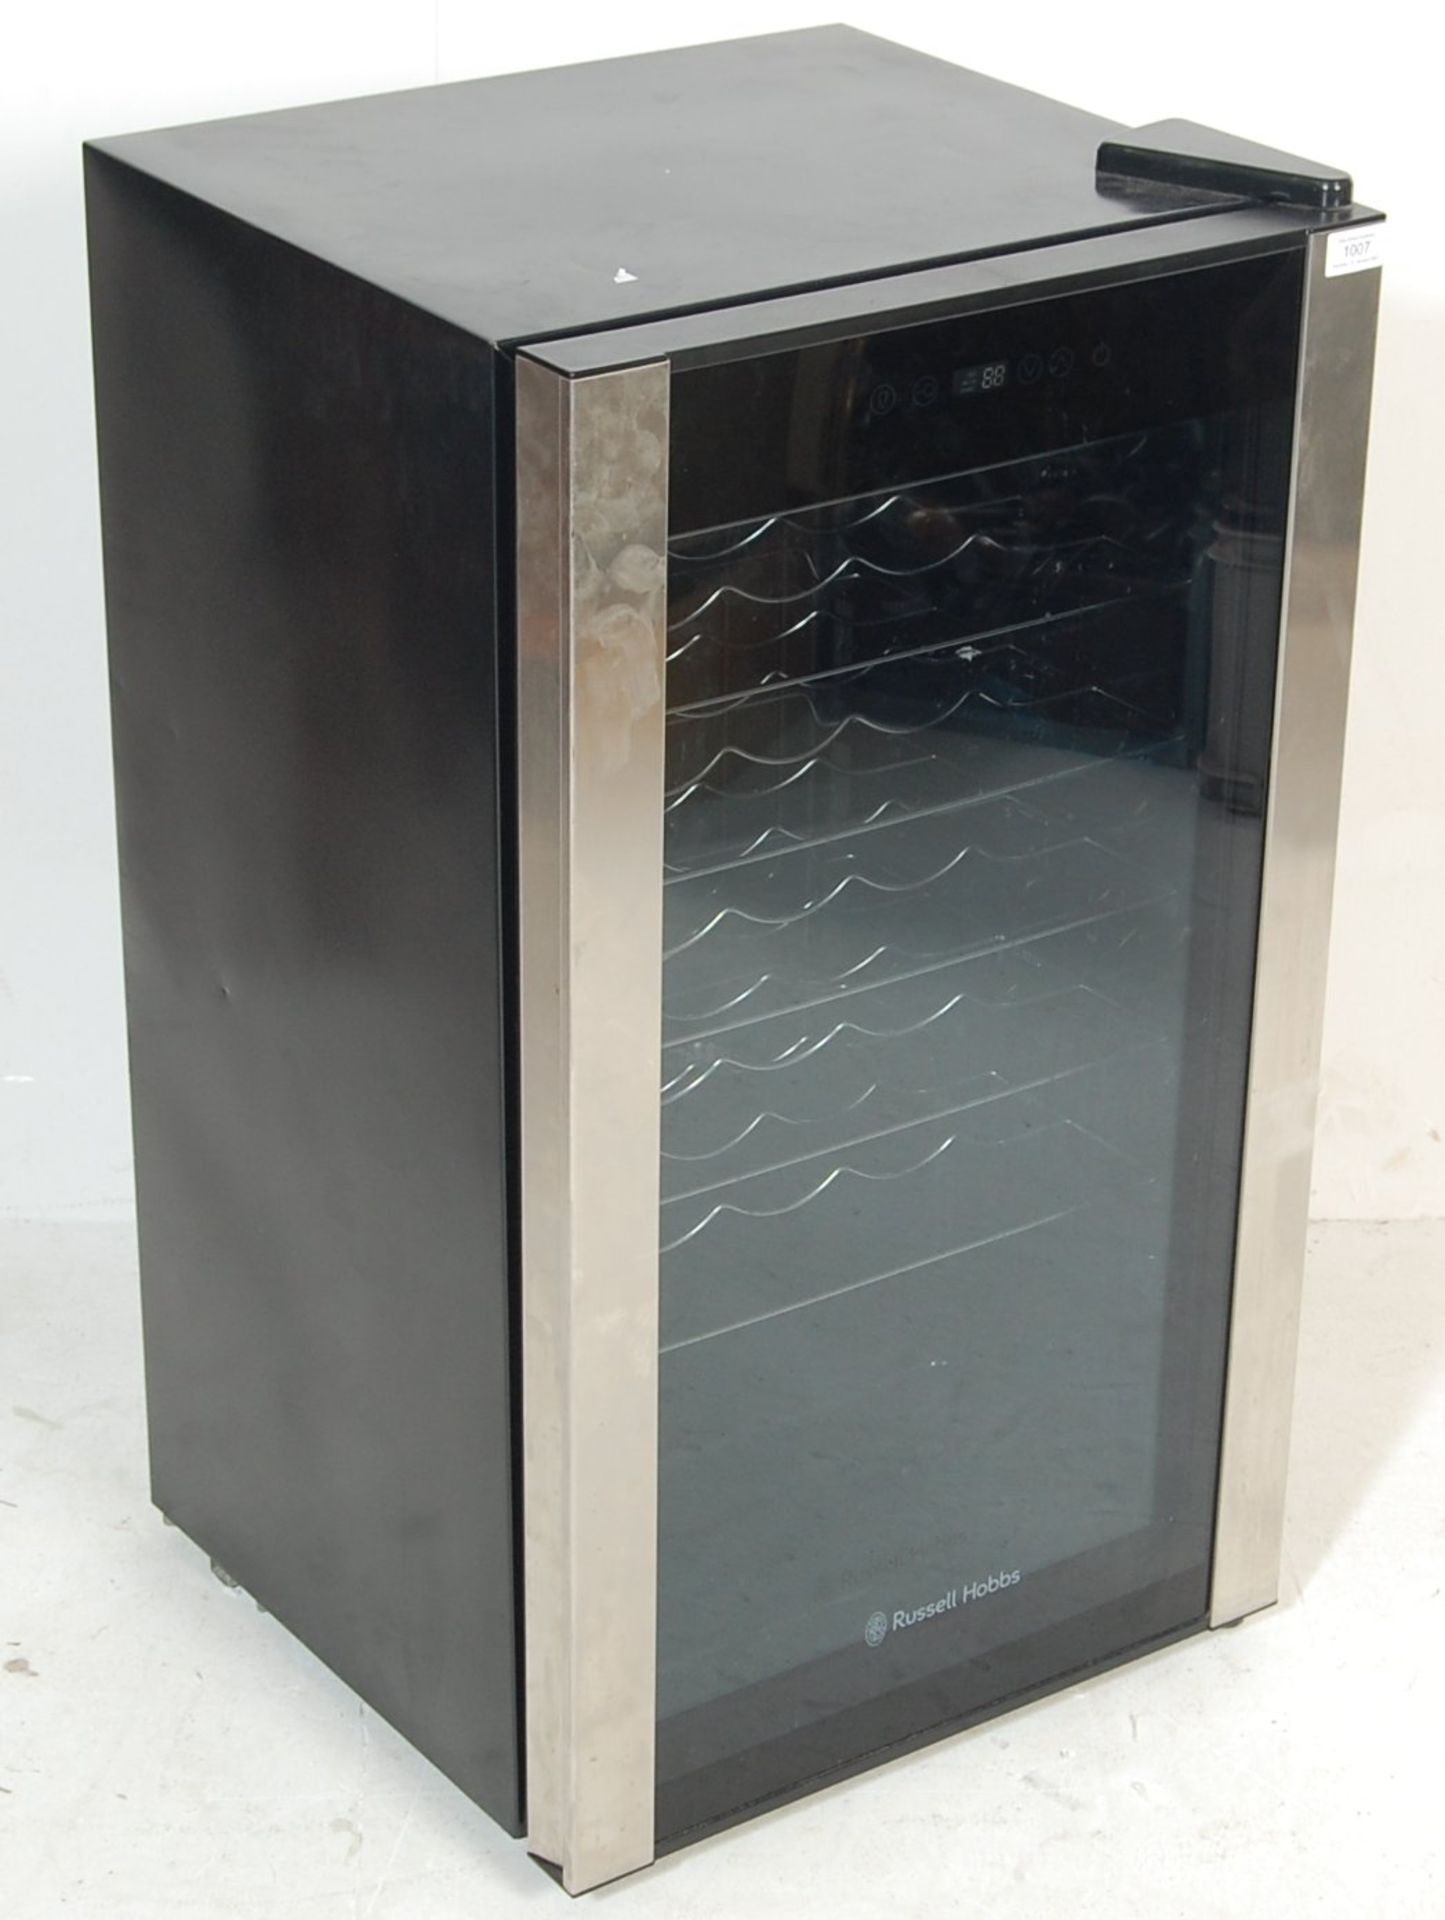 A BRUSHED STEEL AND GLASS RUSSELL HOBBS WINE COOLER - Image 2 of 6